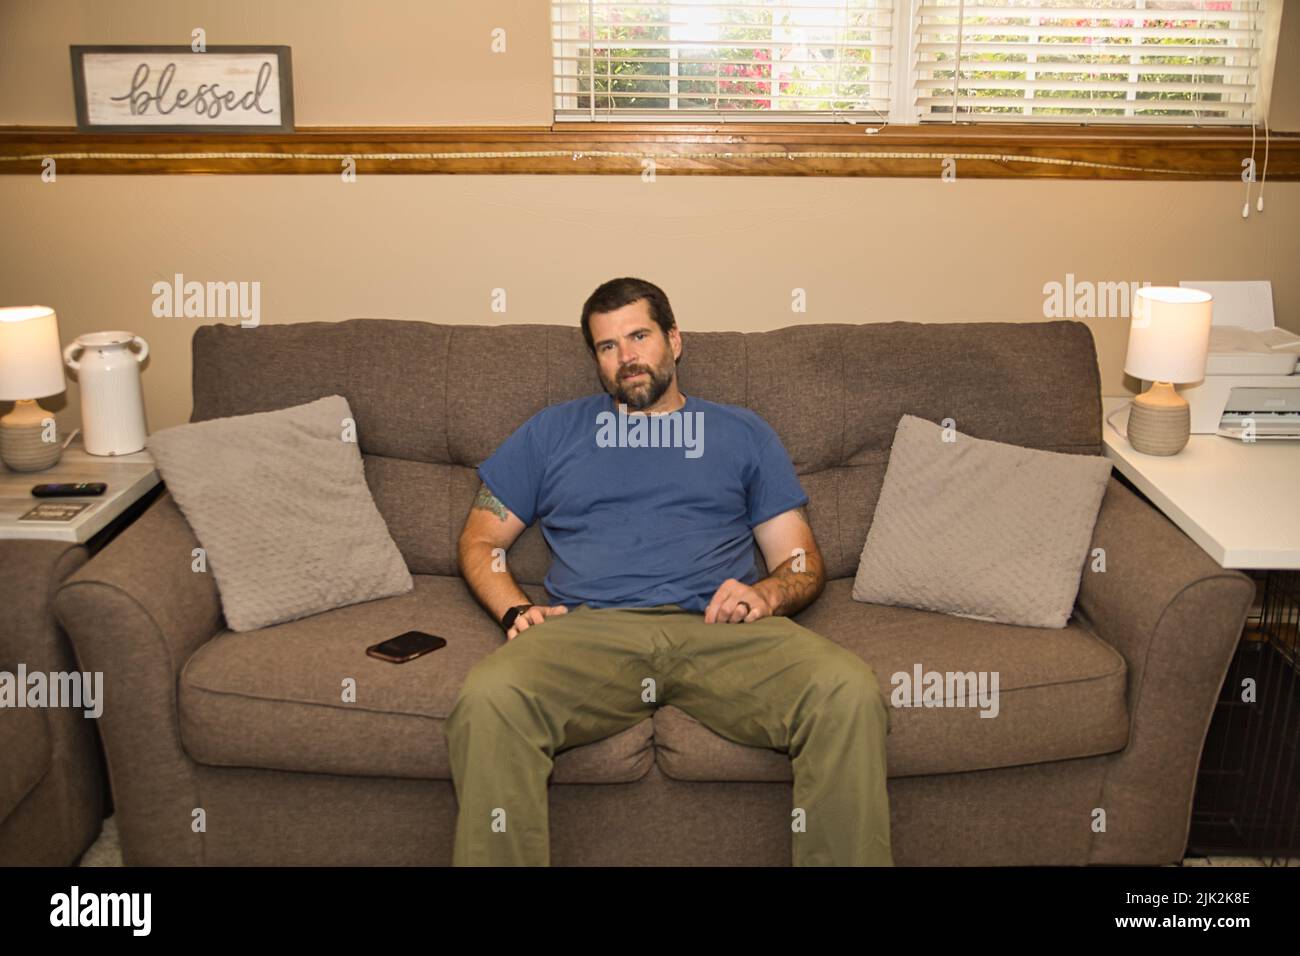 Bearded man in blue shirt relaxing on gray couch. Just chilling. Stock Photo